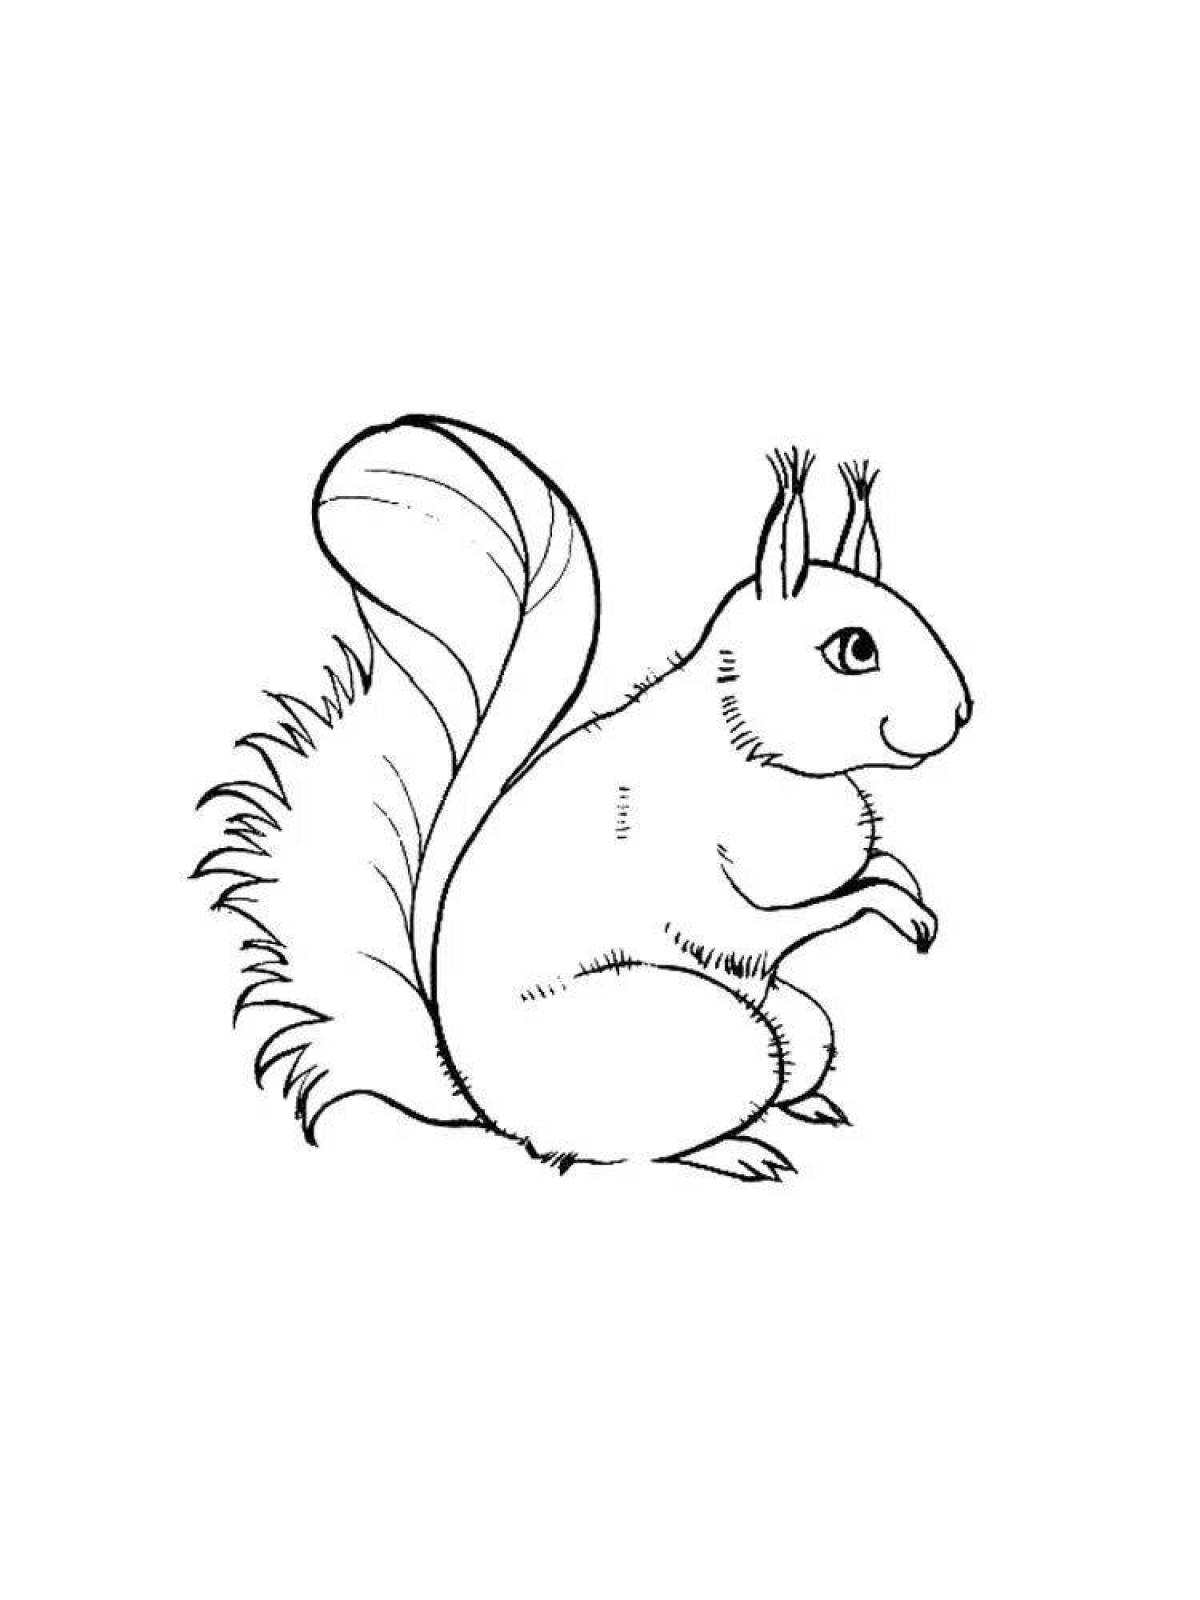 Bright coloring squirrel drawing